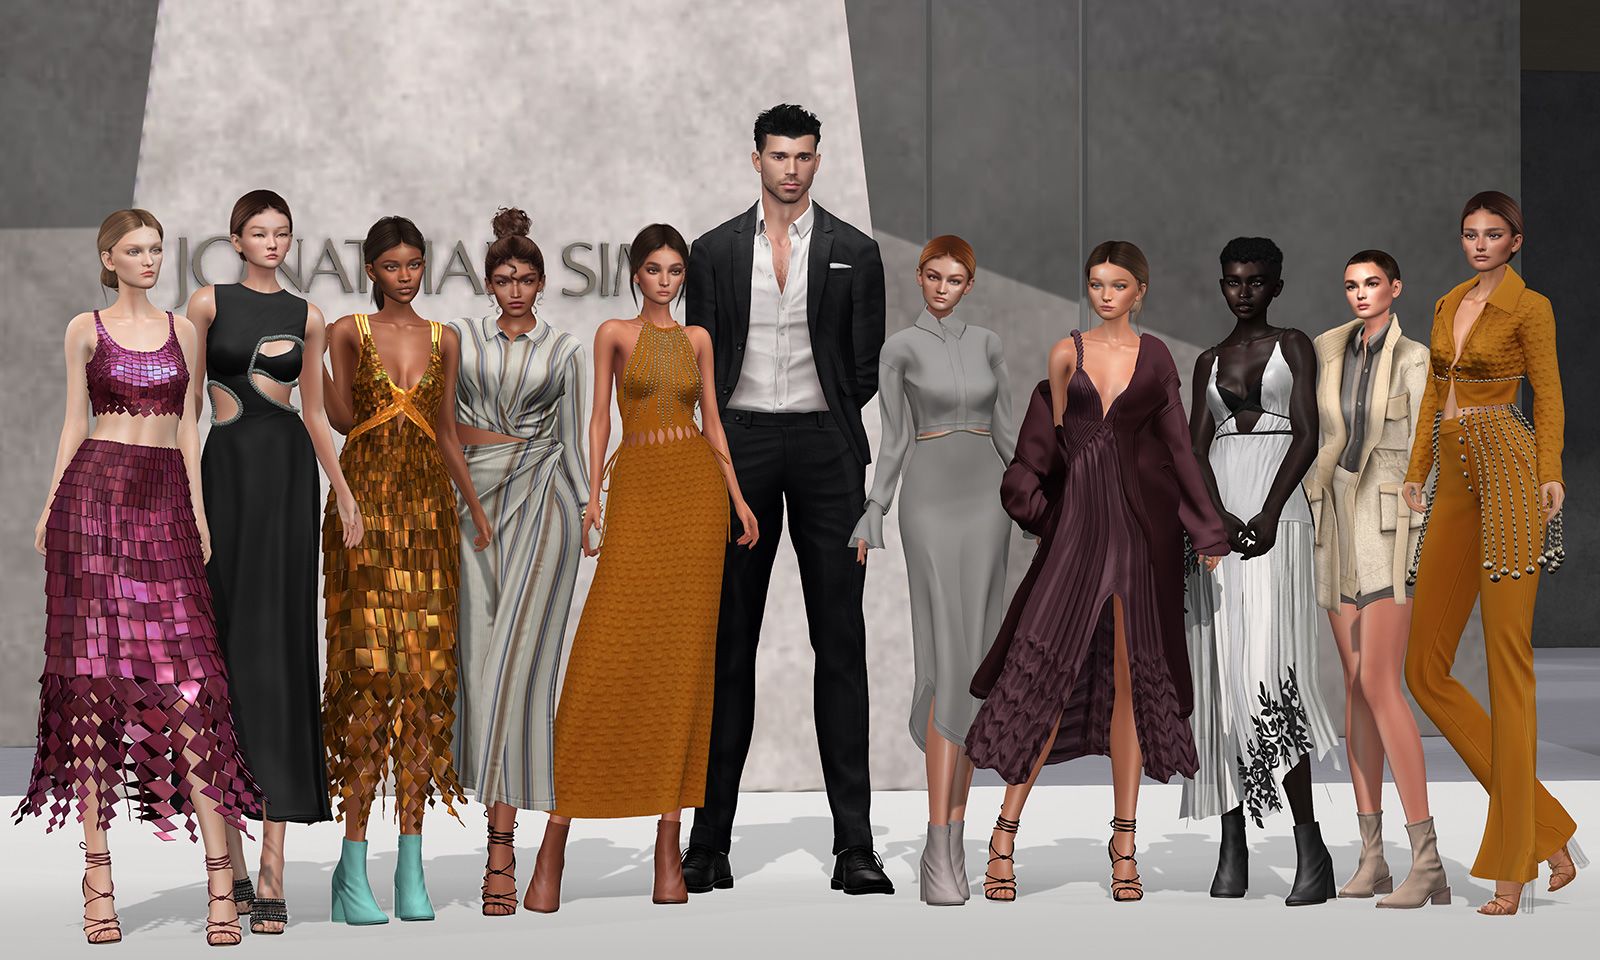 The Sims Reveals a Collaboration with Italian Luxury Fashion House